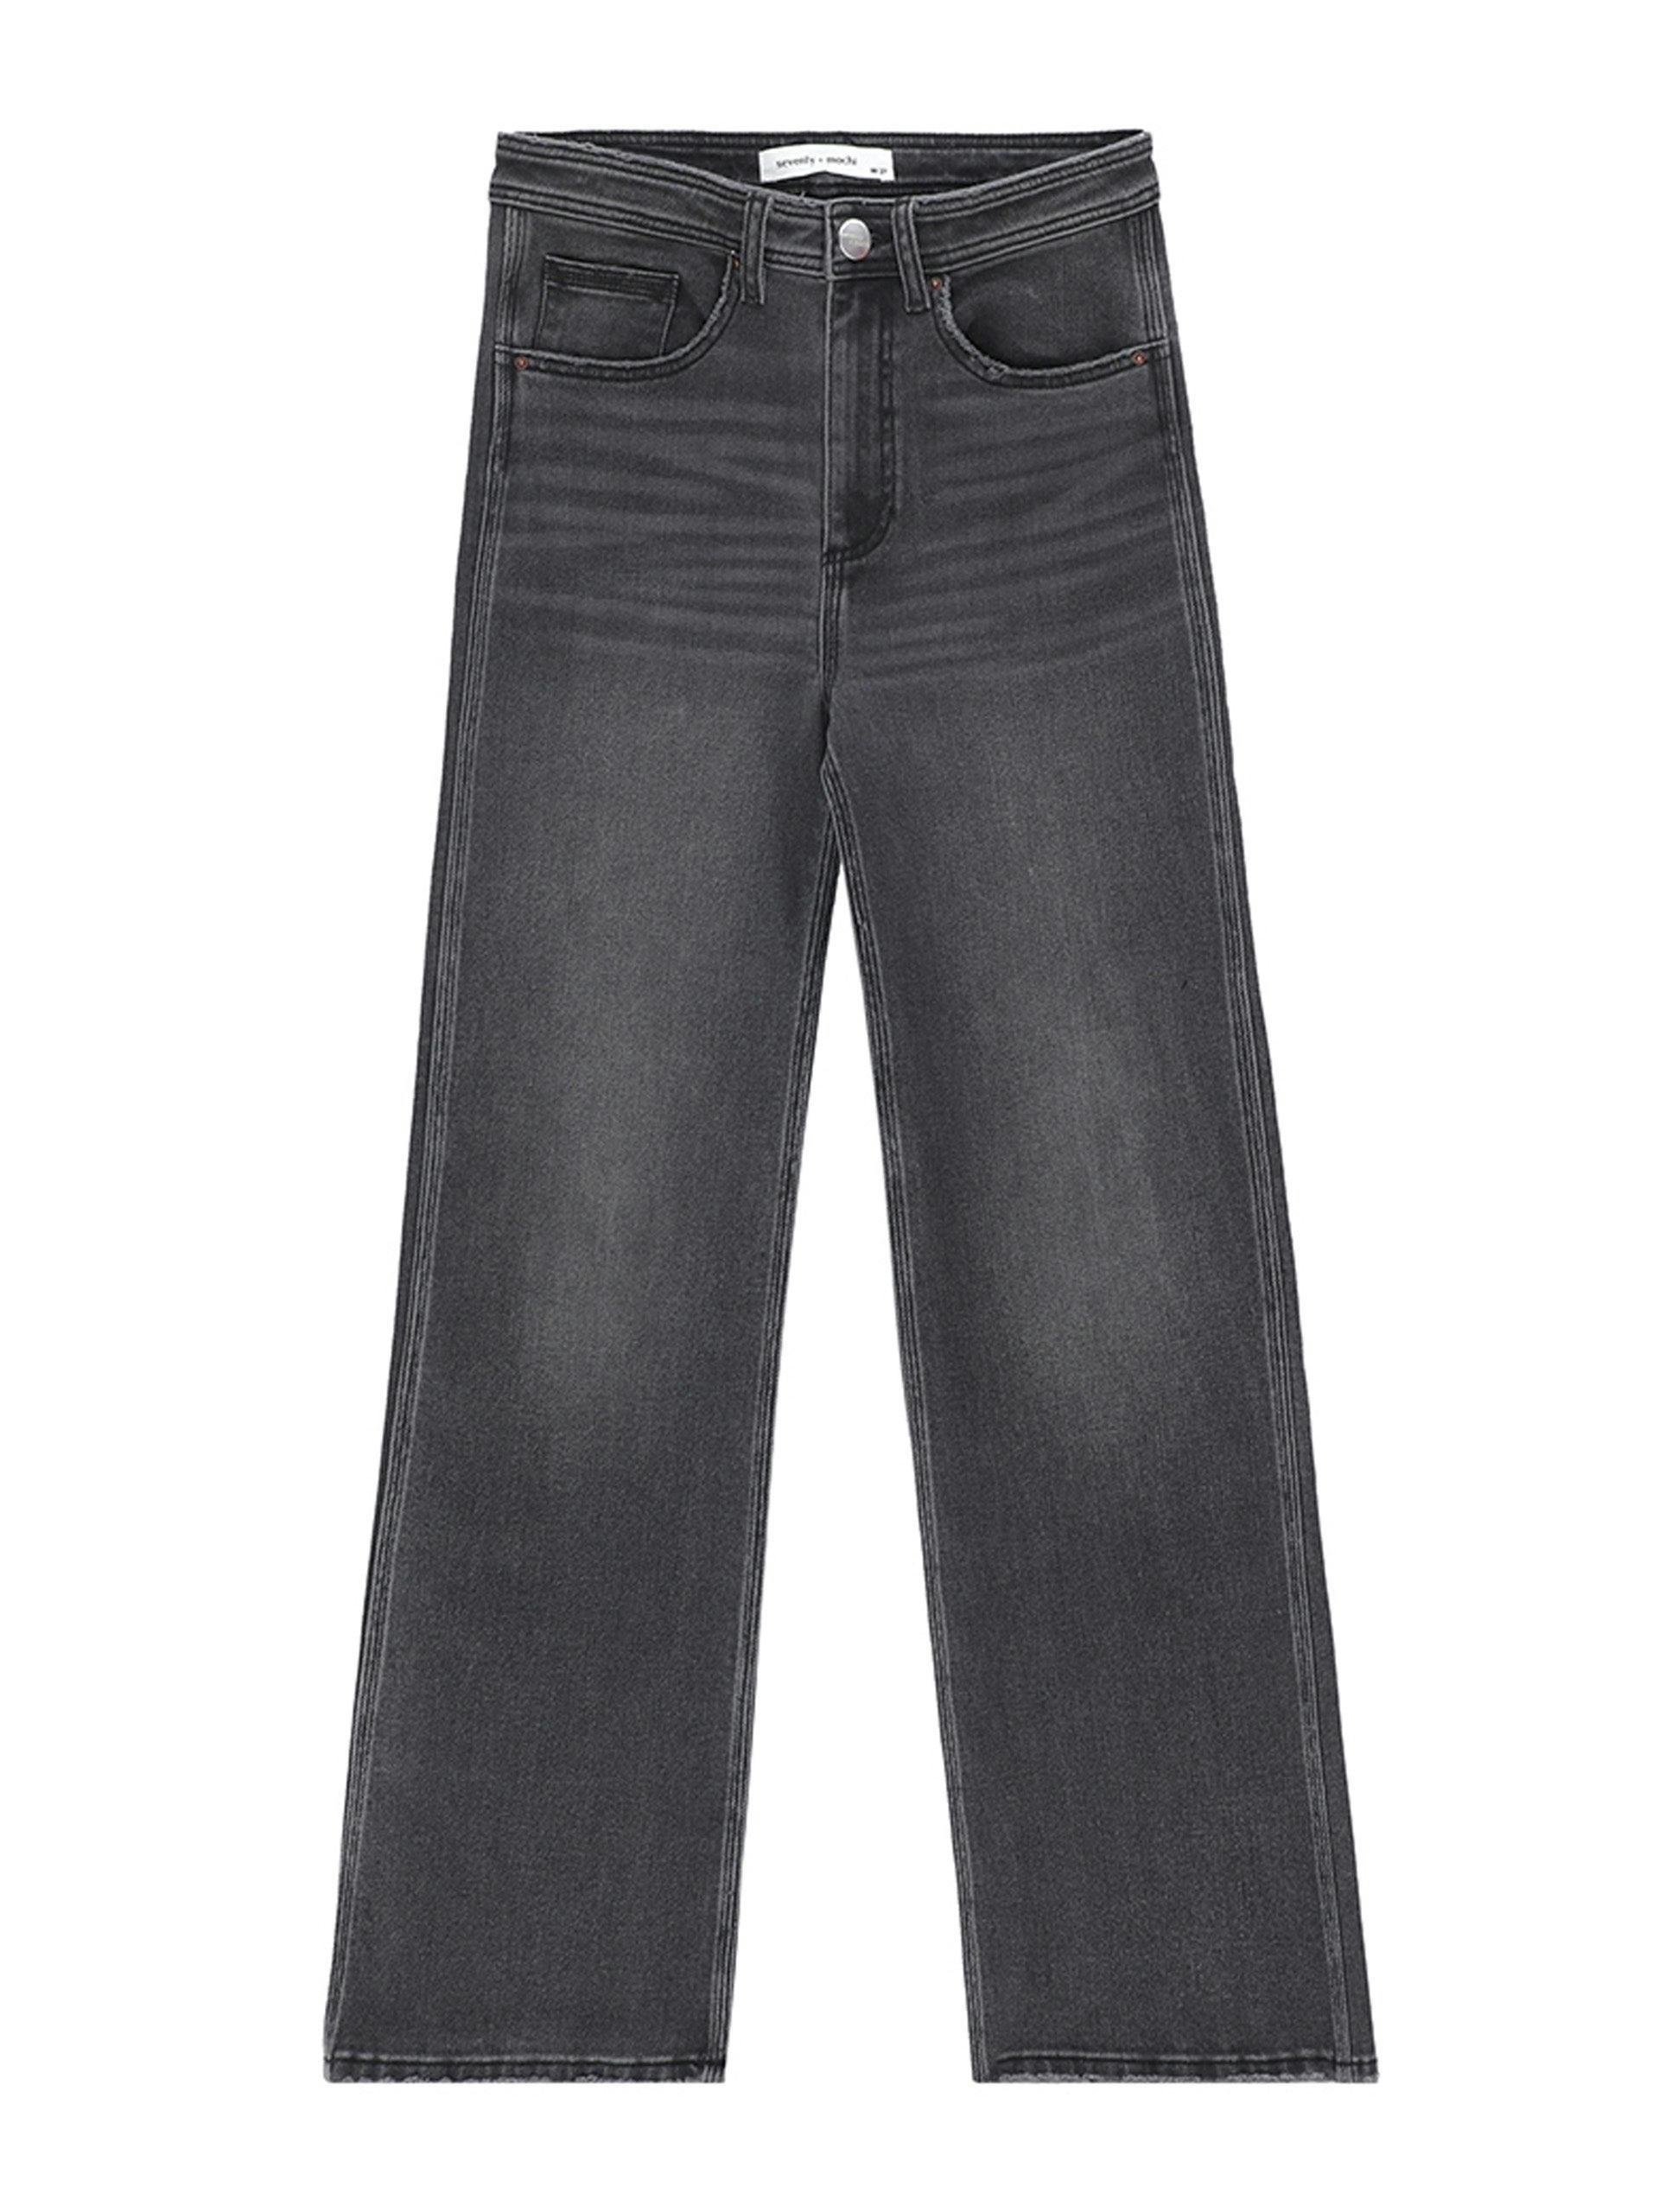 Washed charcoal Mabel jeans